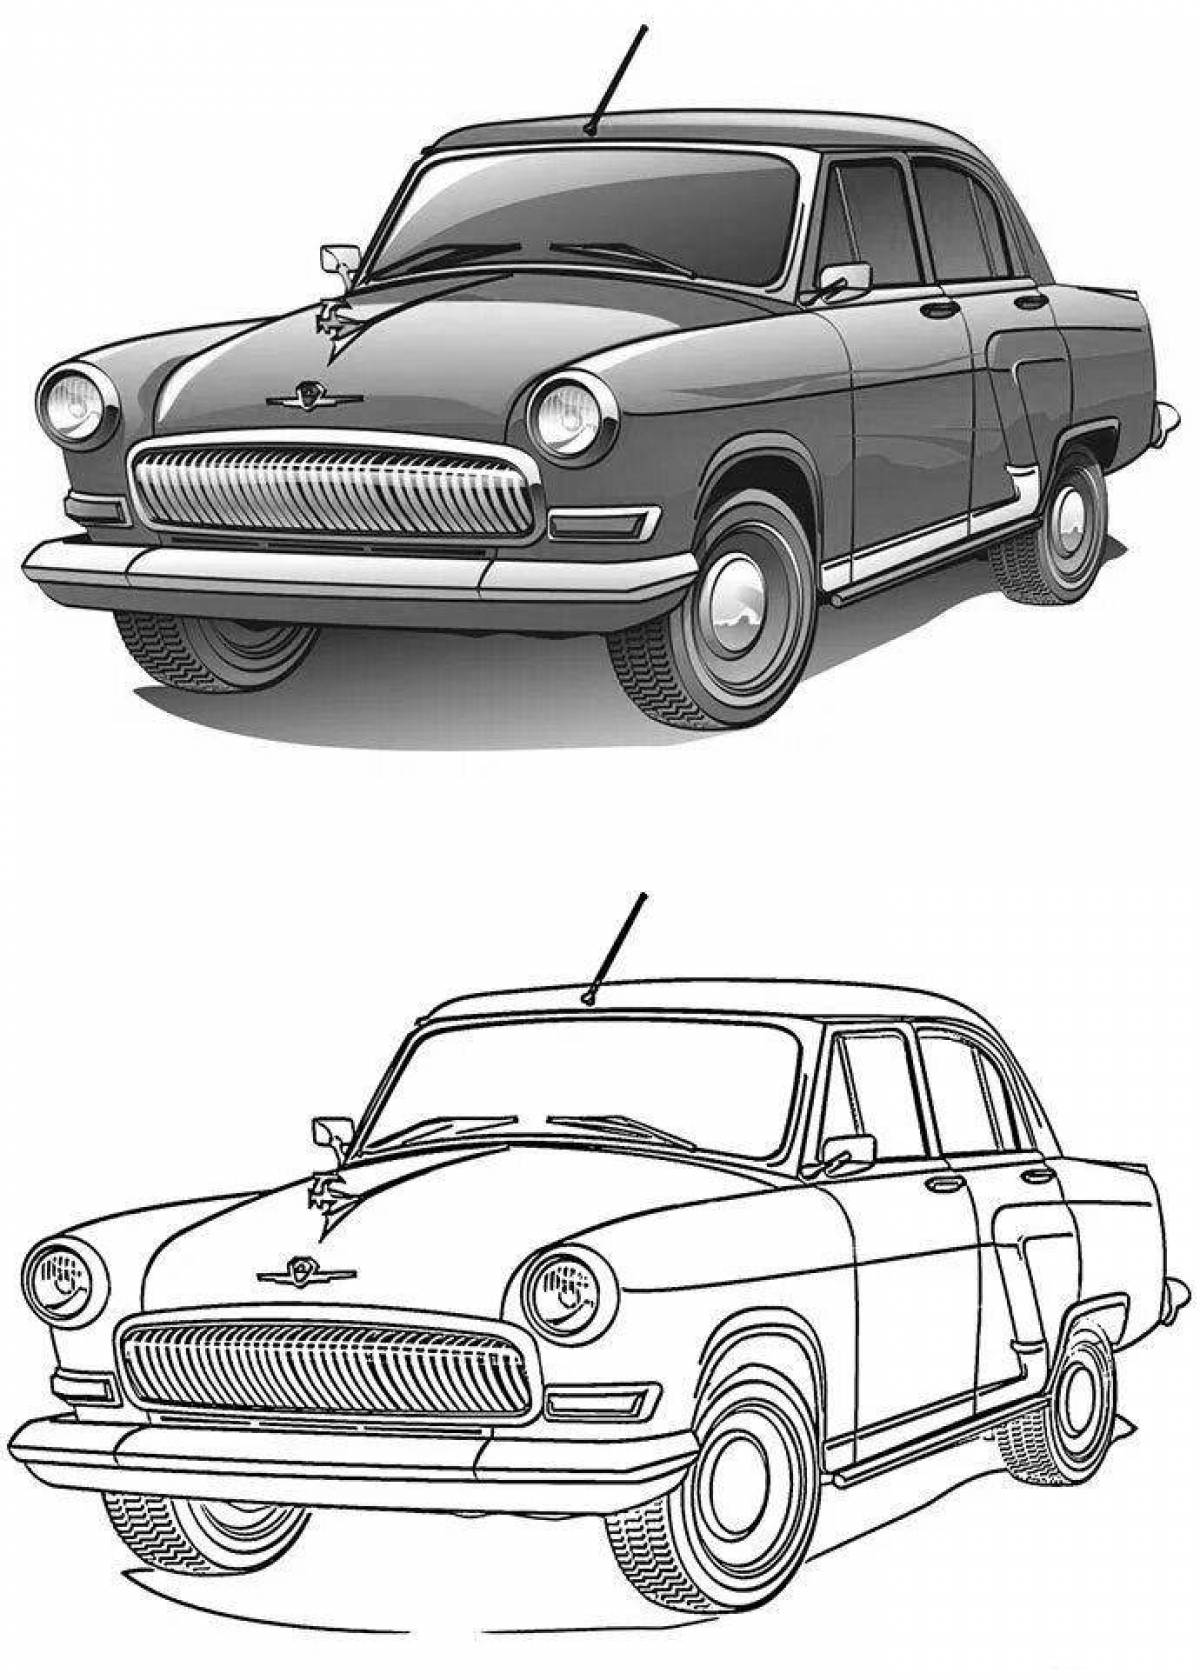 Coloring page magnificent cars of the ussr